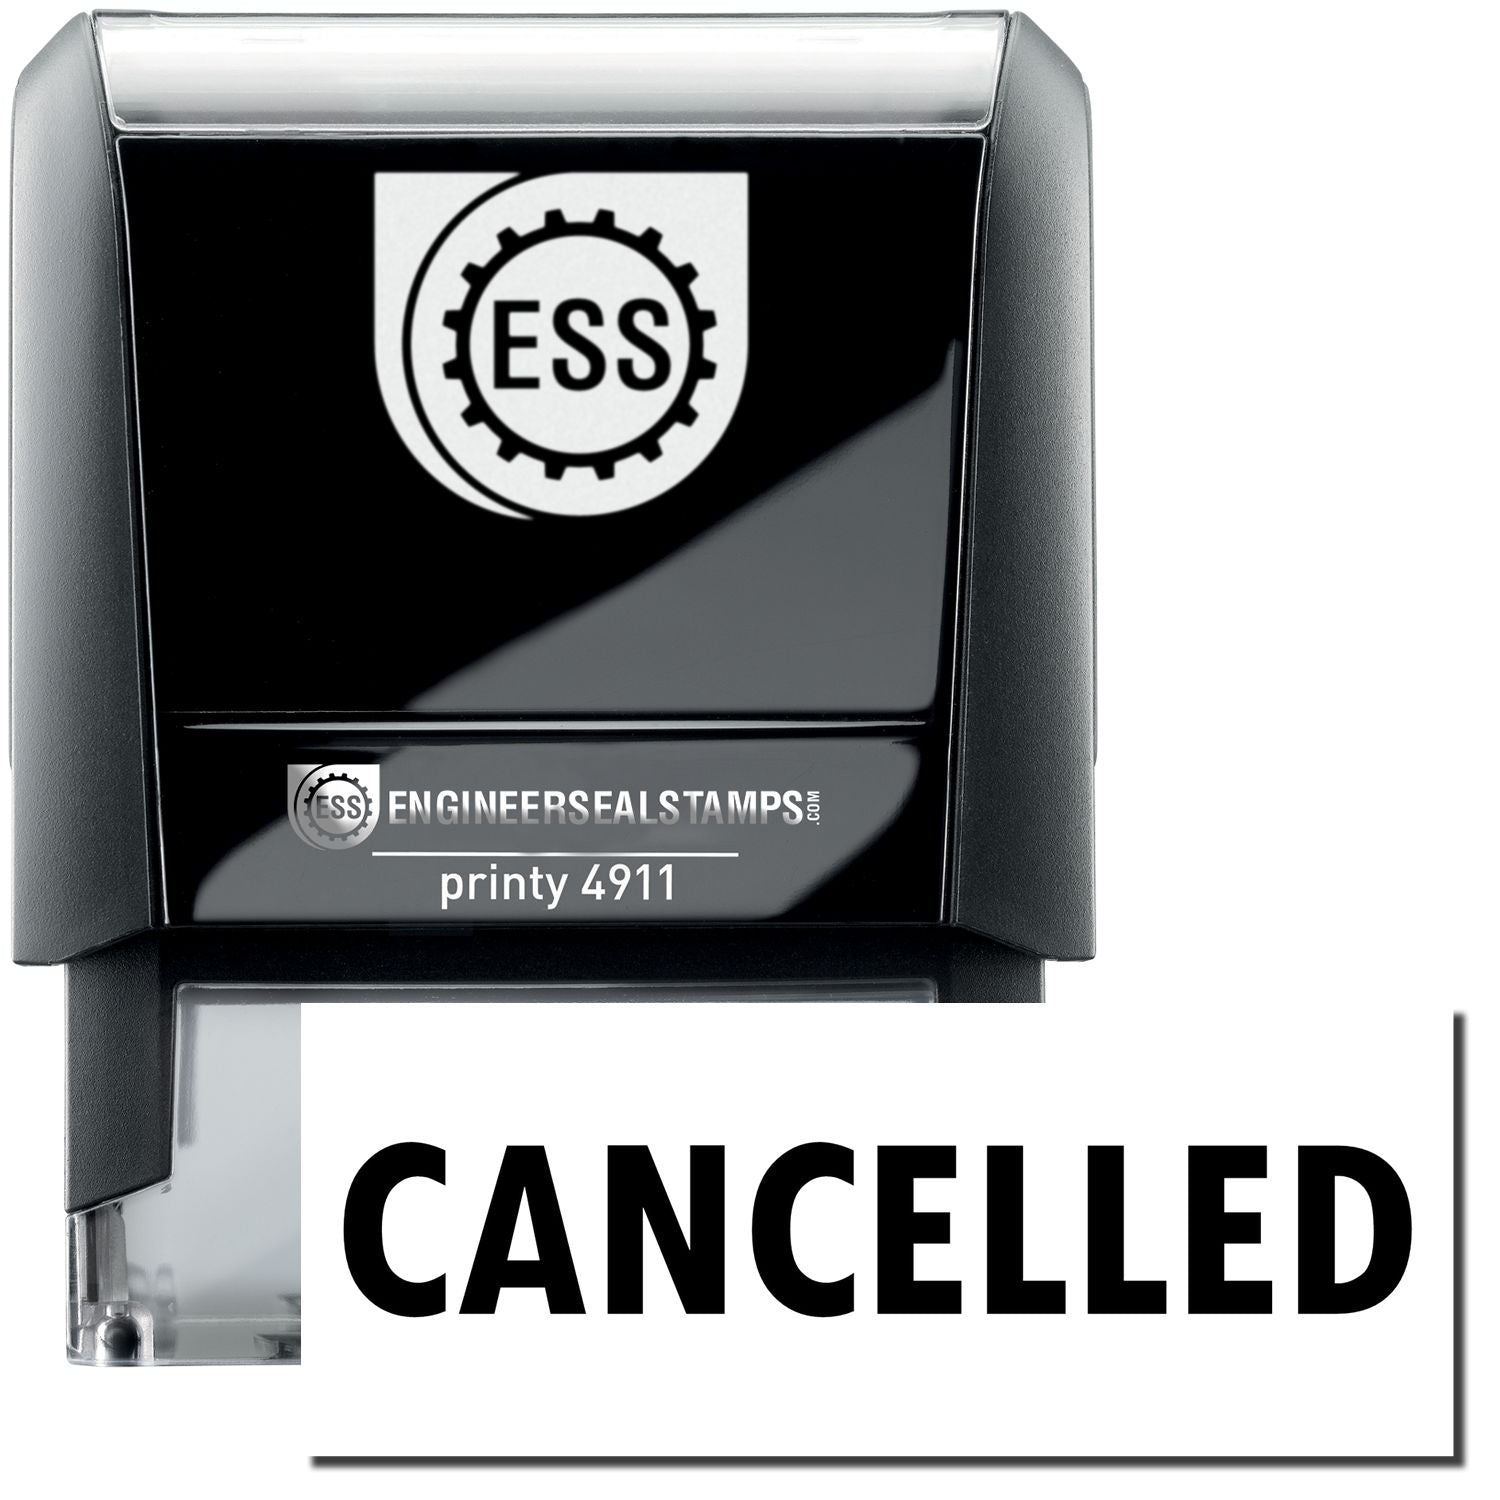 A self-inking stamp with a stamped image showing how the text "CANCELLED" is displayed after stamping.